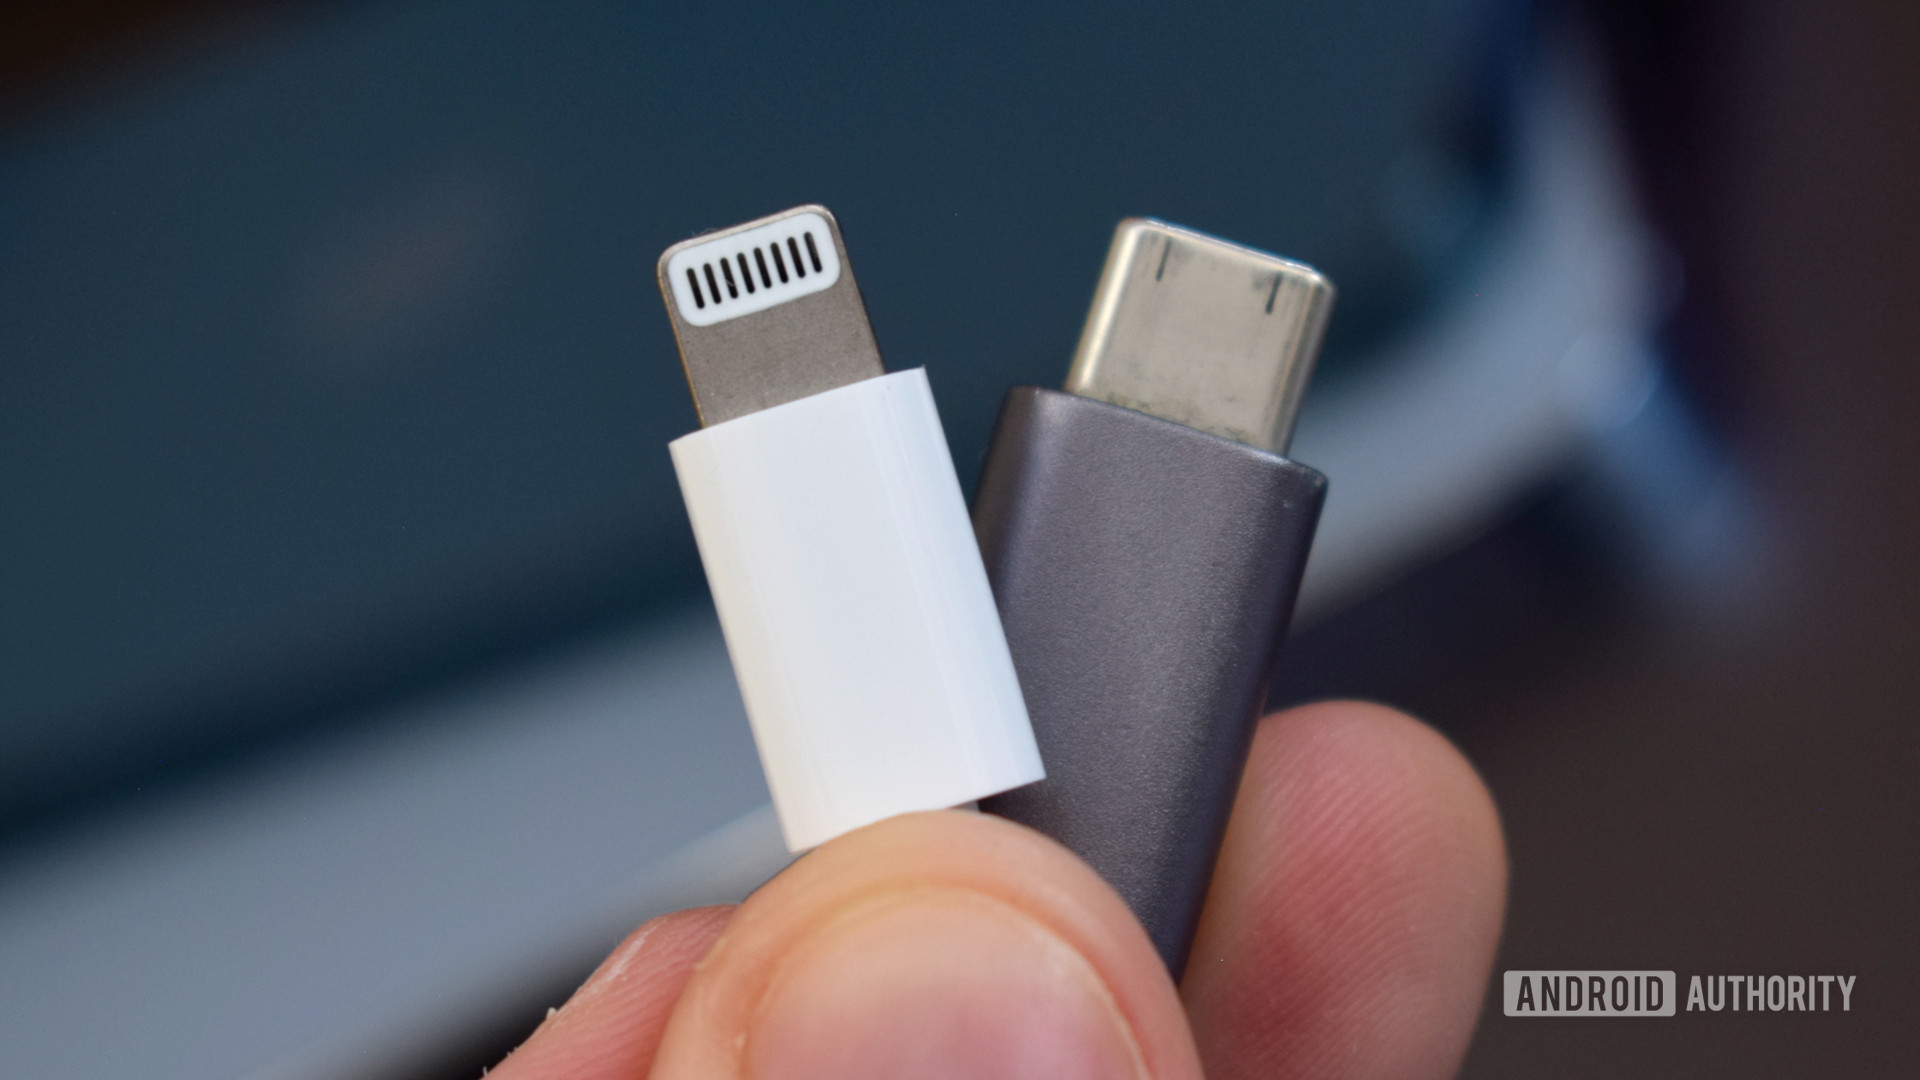 Lightning Connector vs USB C cable